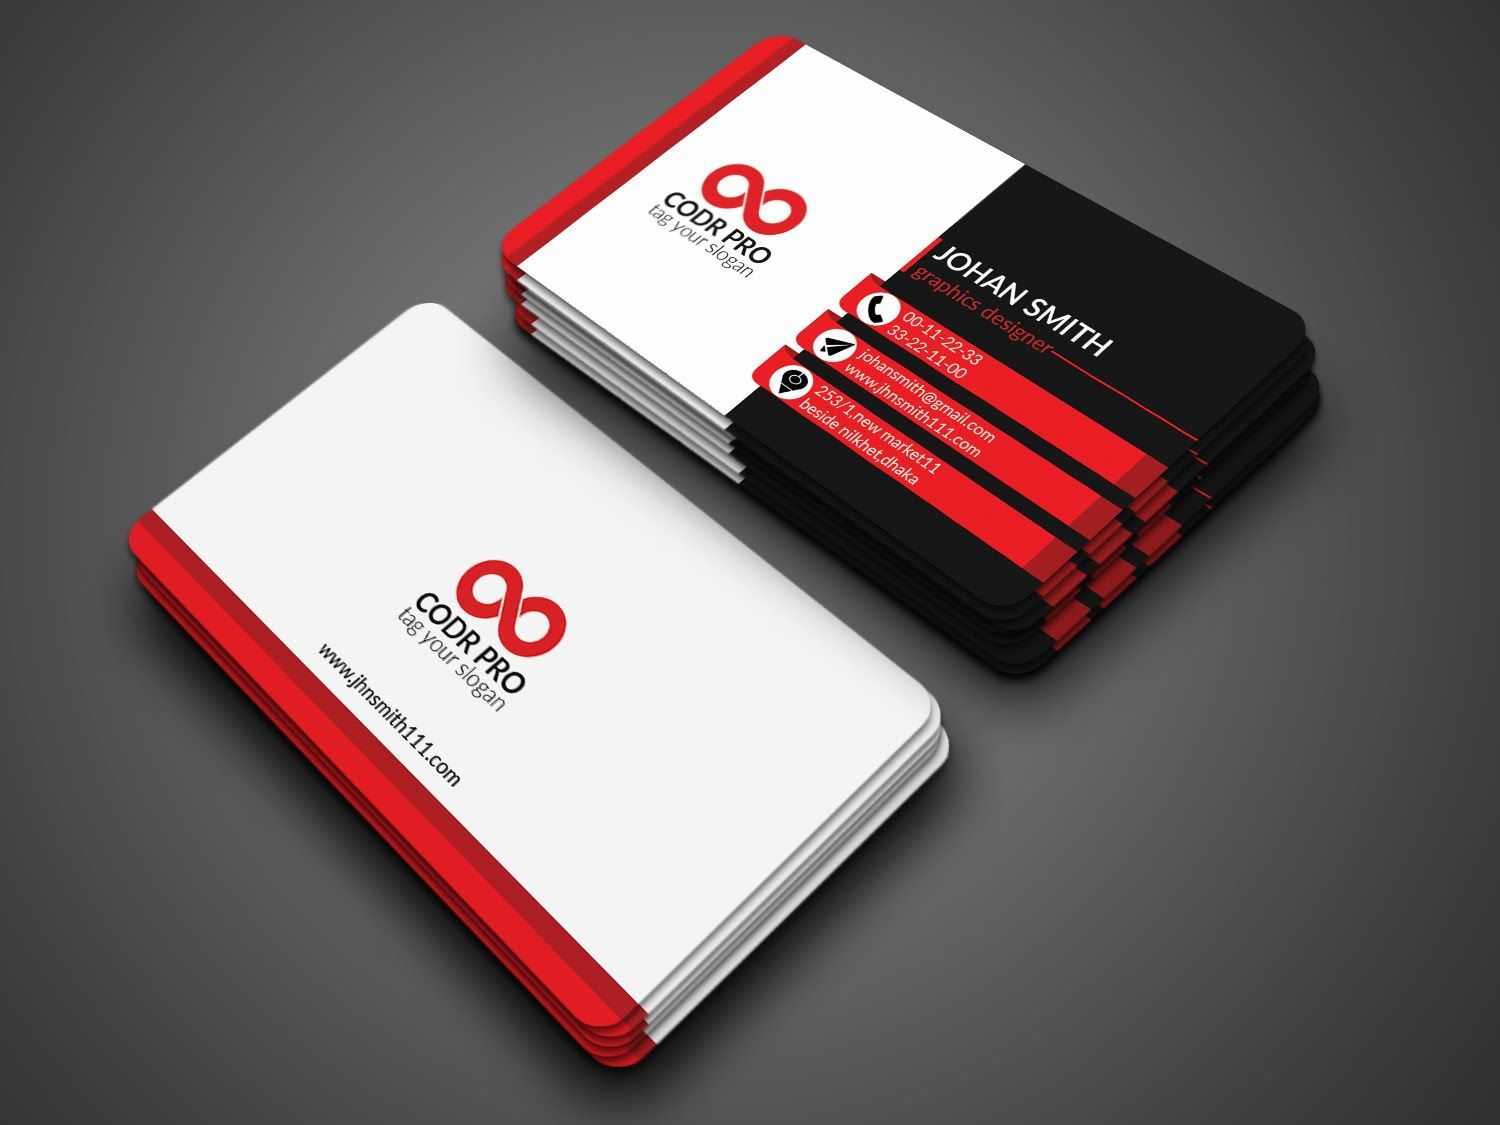 Professional Business Card Design In Photoshop Cs6 Tutorial With Business Card Template Photoshop Cs6